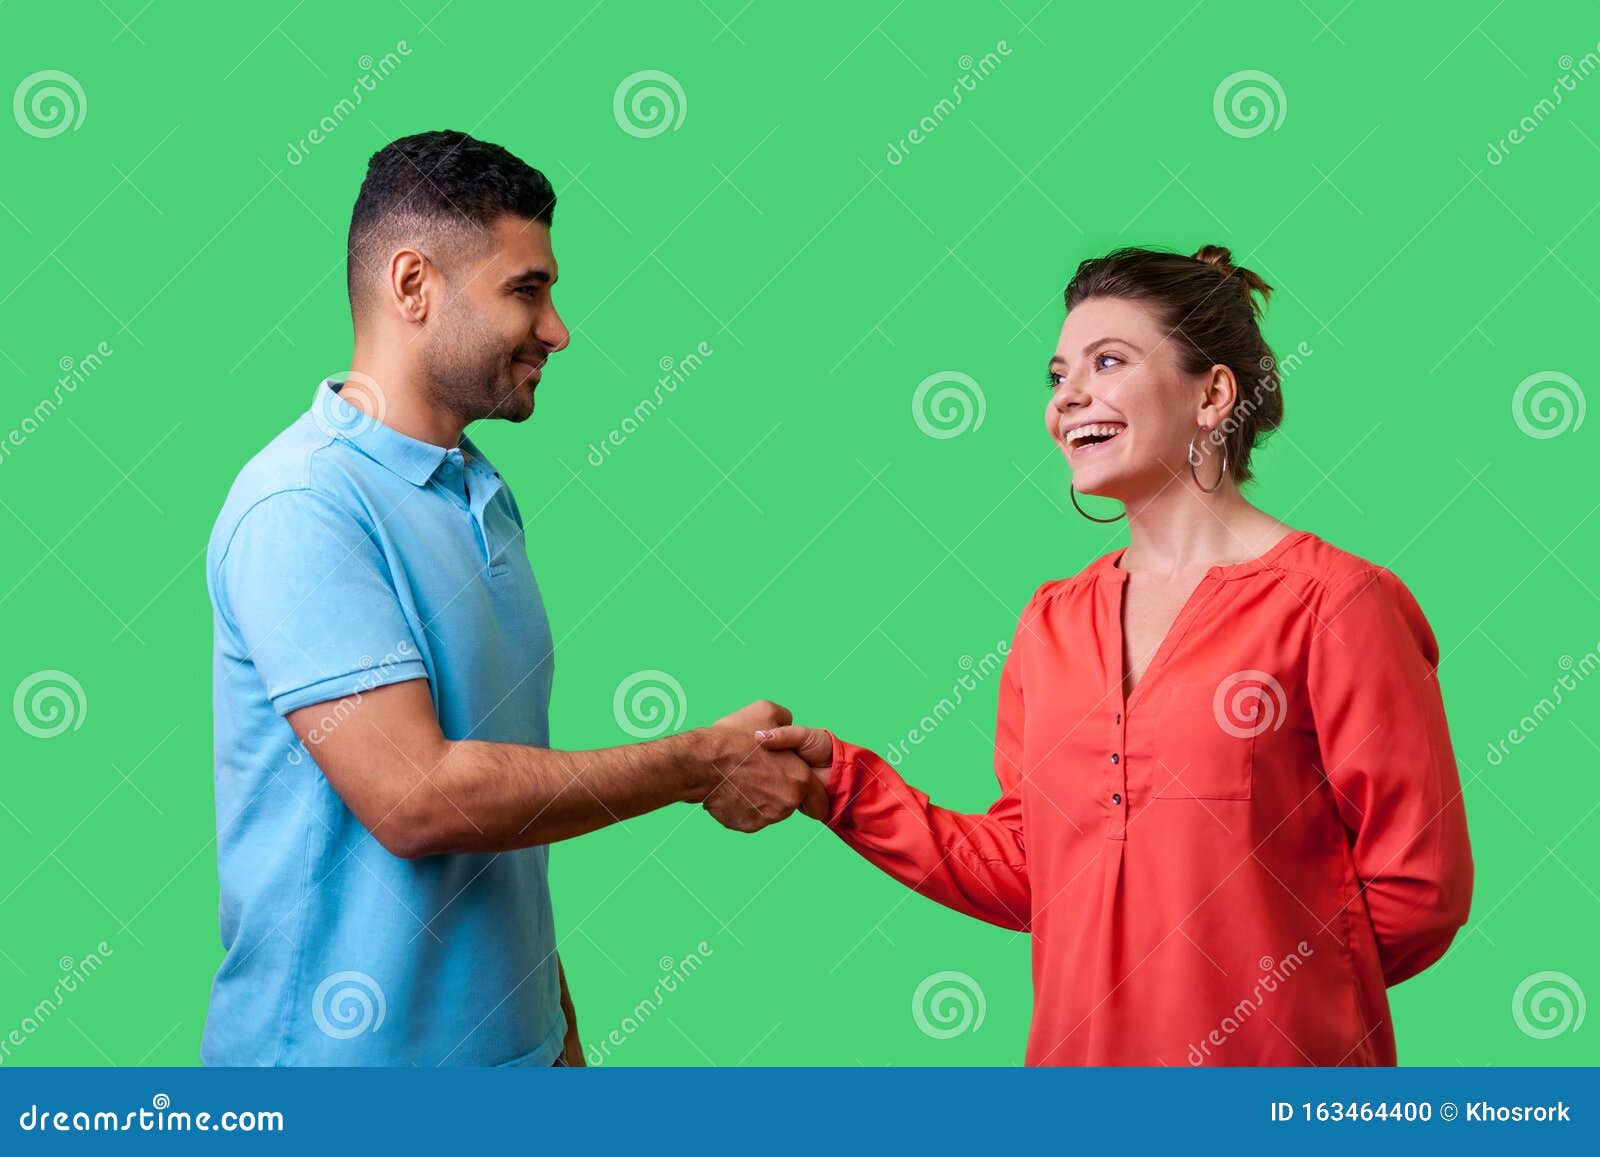 nice to meet you! portrait of happy young couple in casual wear shaking hands.  on green background